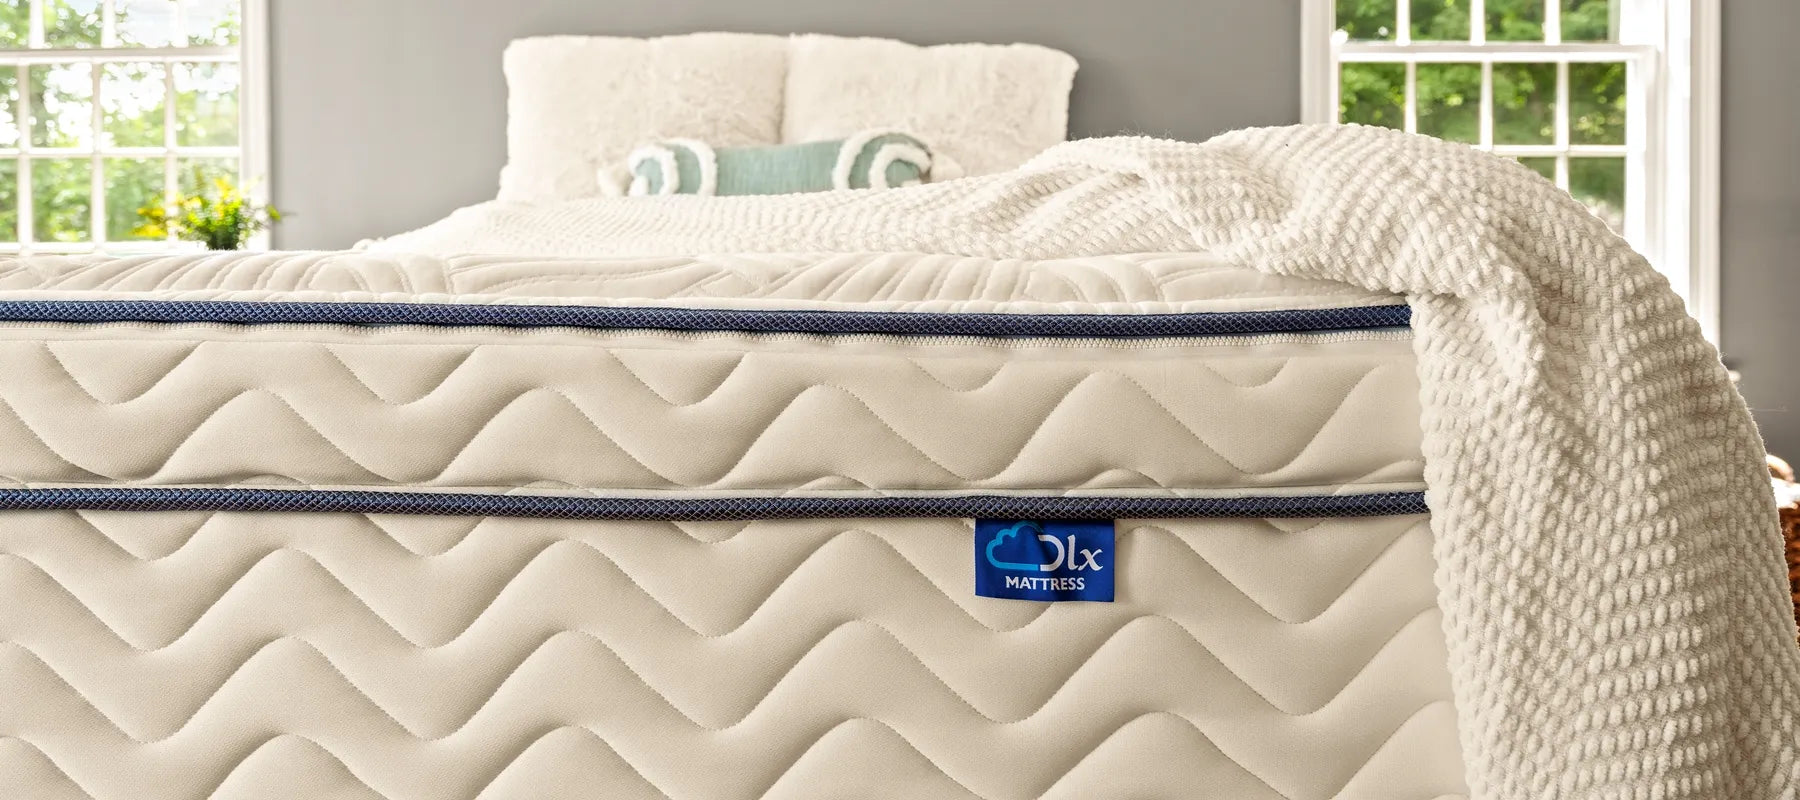 Close-up view of the DLX hybrid mattress showing the distinct blue DLX logo label.